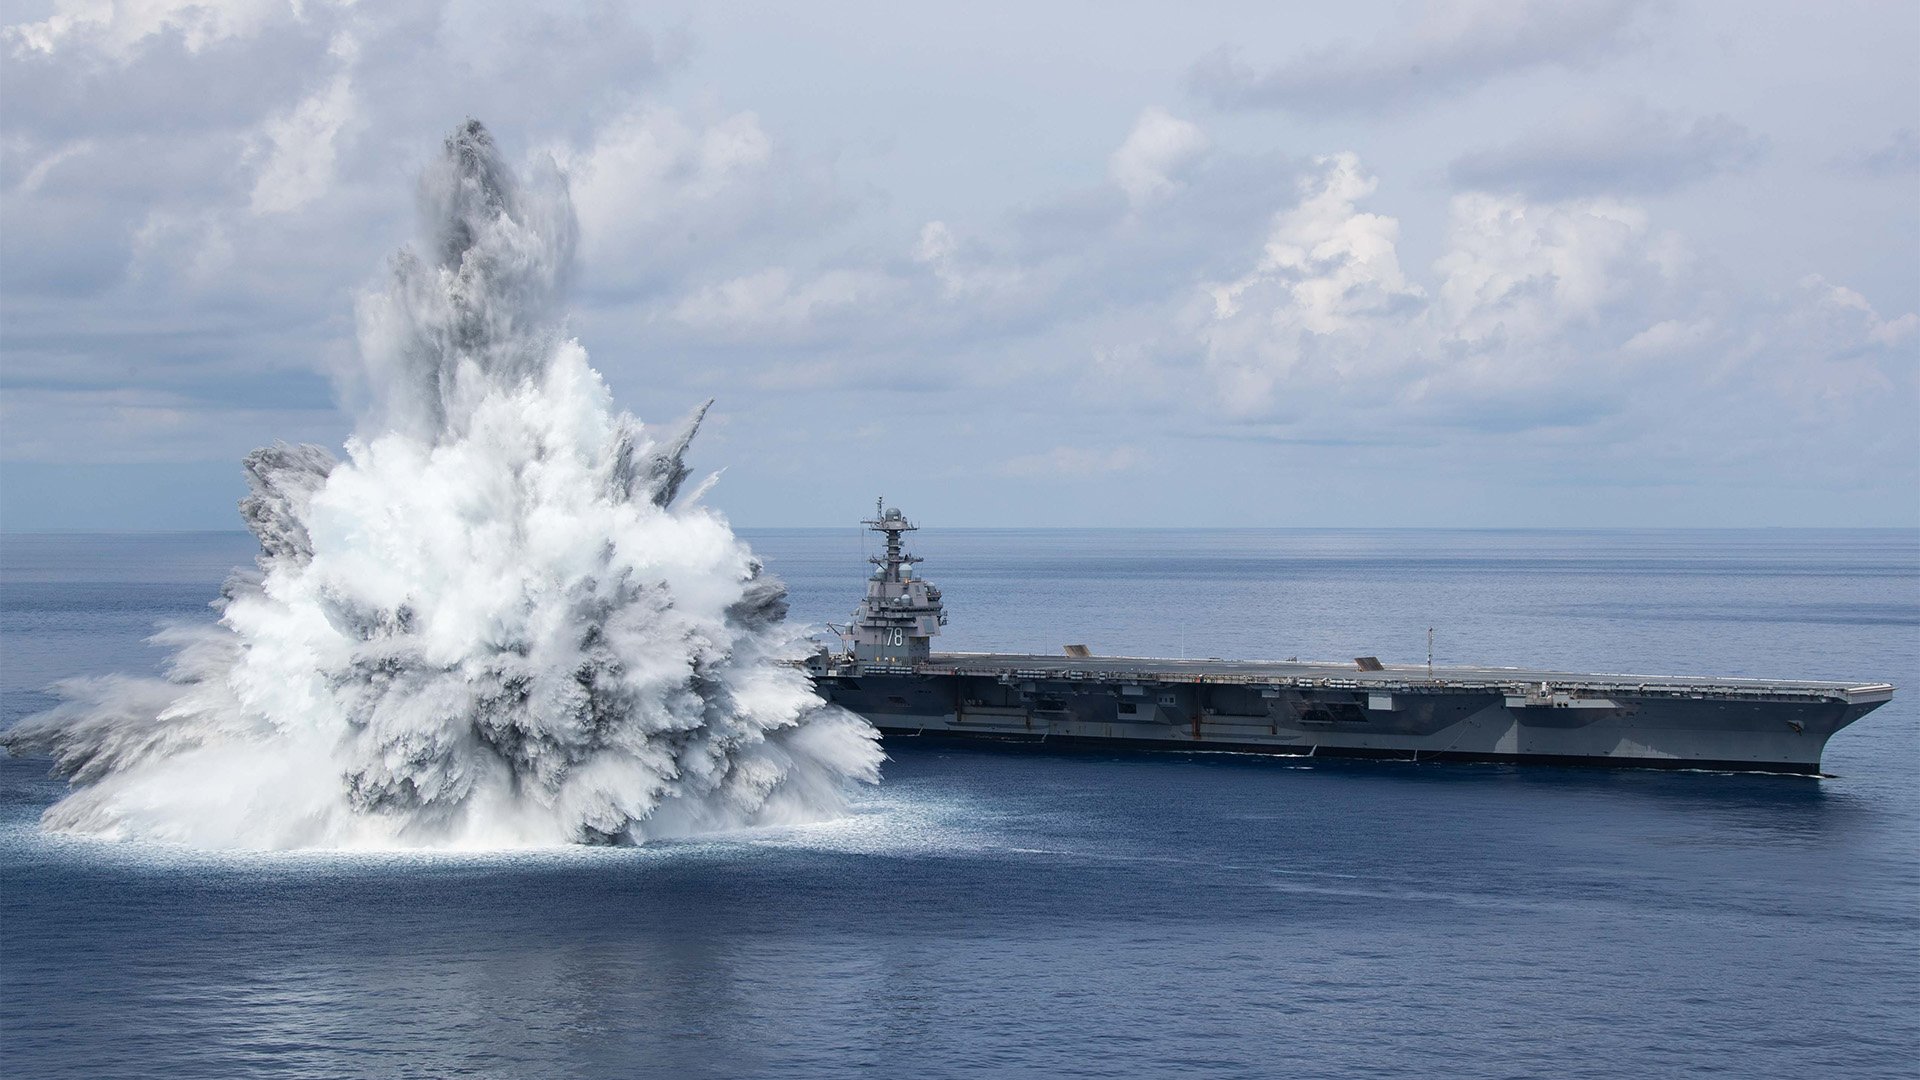 The aircraft carrier Gerald R. Ford (CVN 78) successfully completed the third and final scheduled explosive event for Full Ship Shock Trials while underway in the Atlantic Ocean, Aug. 8, 2021. Shock trials of new ship designs using live explosives confirm that US Navy warships will meet demanding mission requirements during battle. US Navy Photo by Mass Communication Specialist 3rd Class Jackson Adkins.